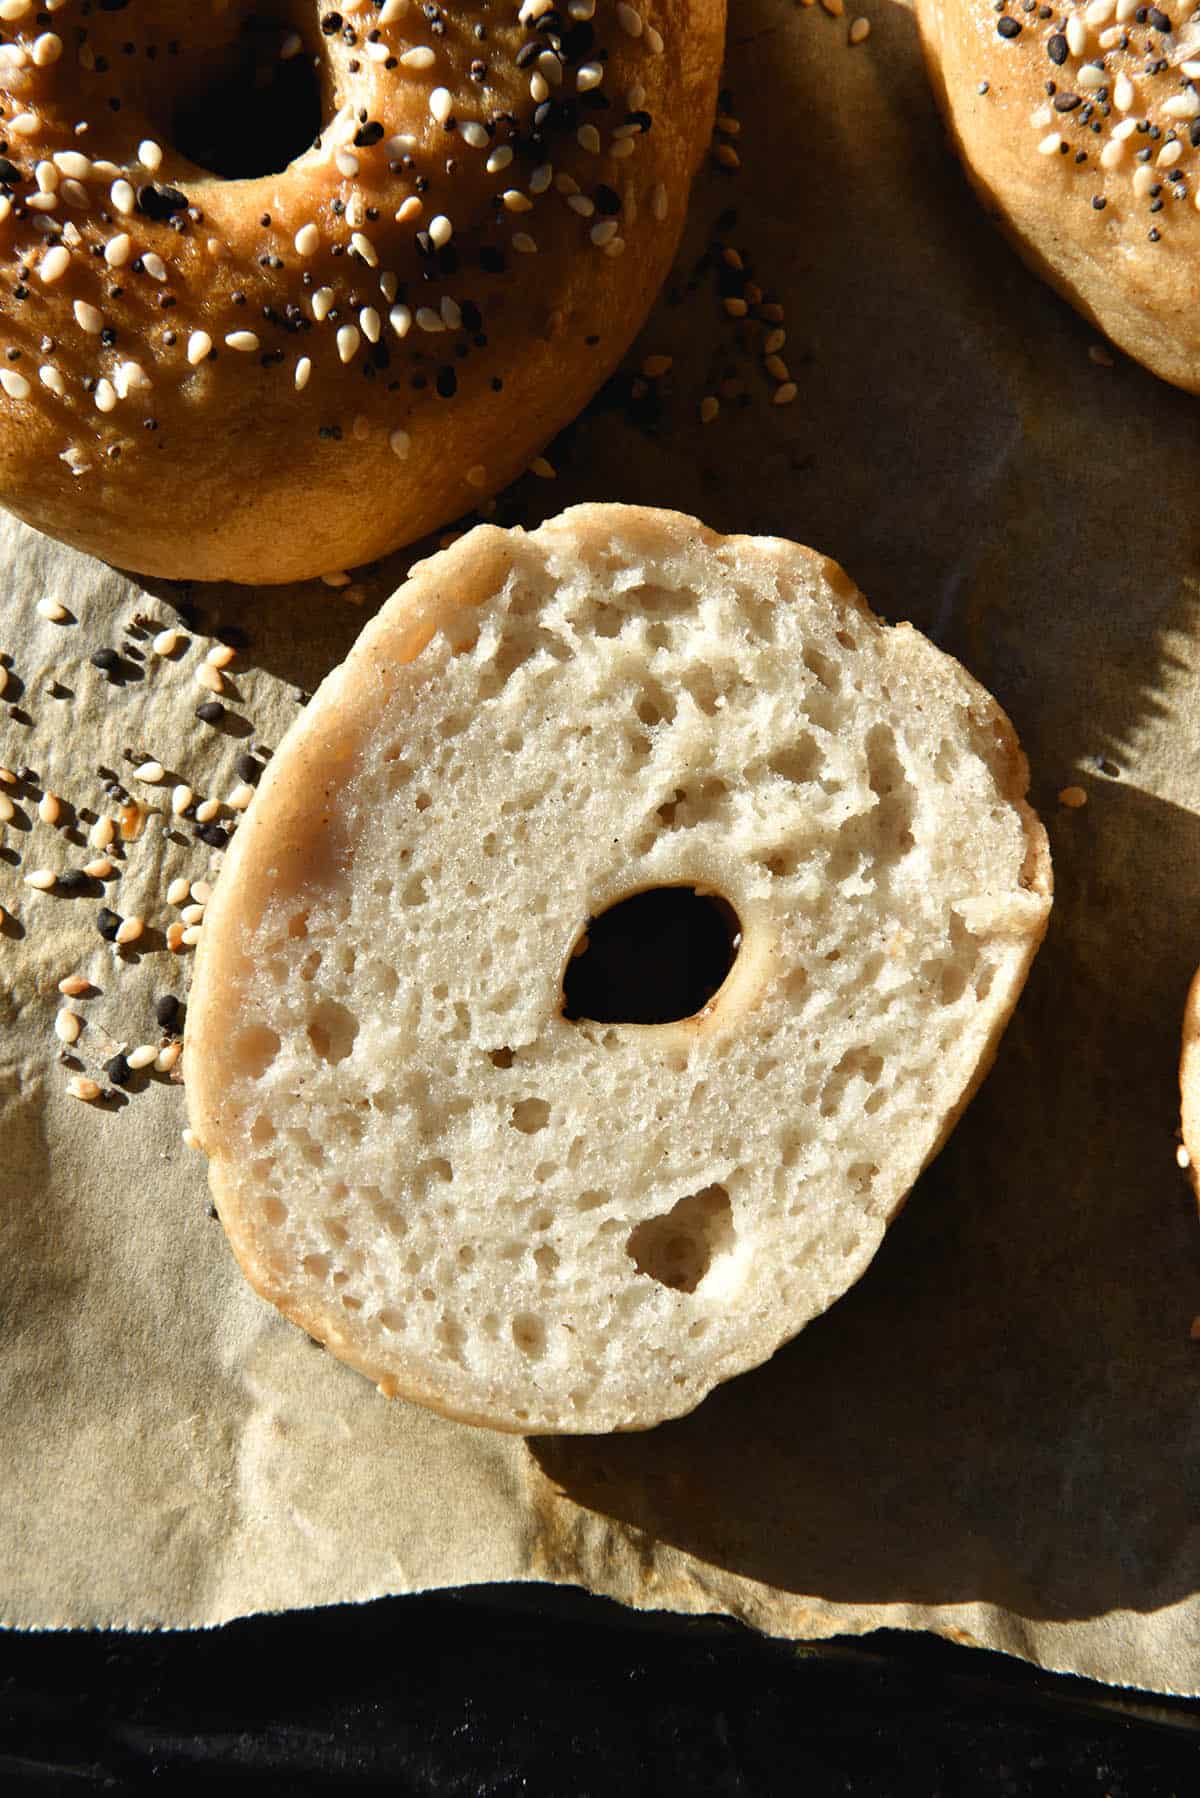 An aerial close up view of the crumb of a gluten free bagel. The bagel has been sliced and sits crumb side up on a lined baking sheet. It has an open crumb and is surrounded by other bagels and sprinkles of everything bagel seasoning 